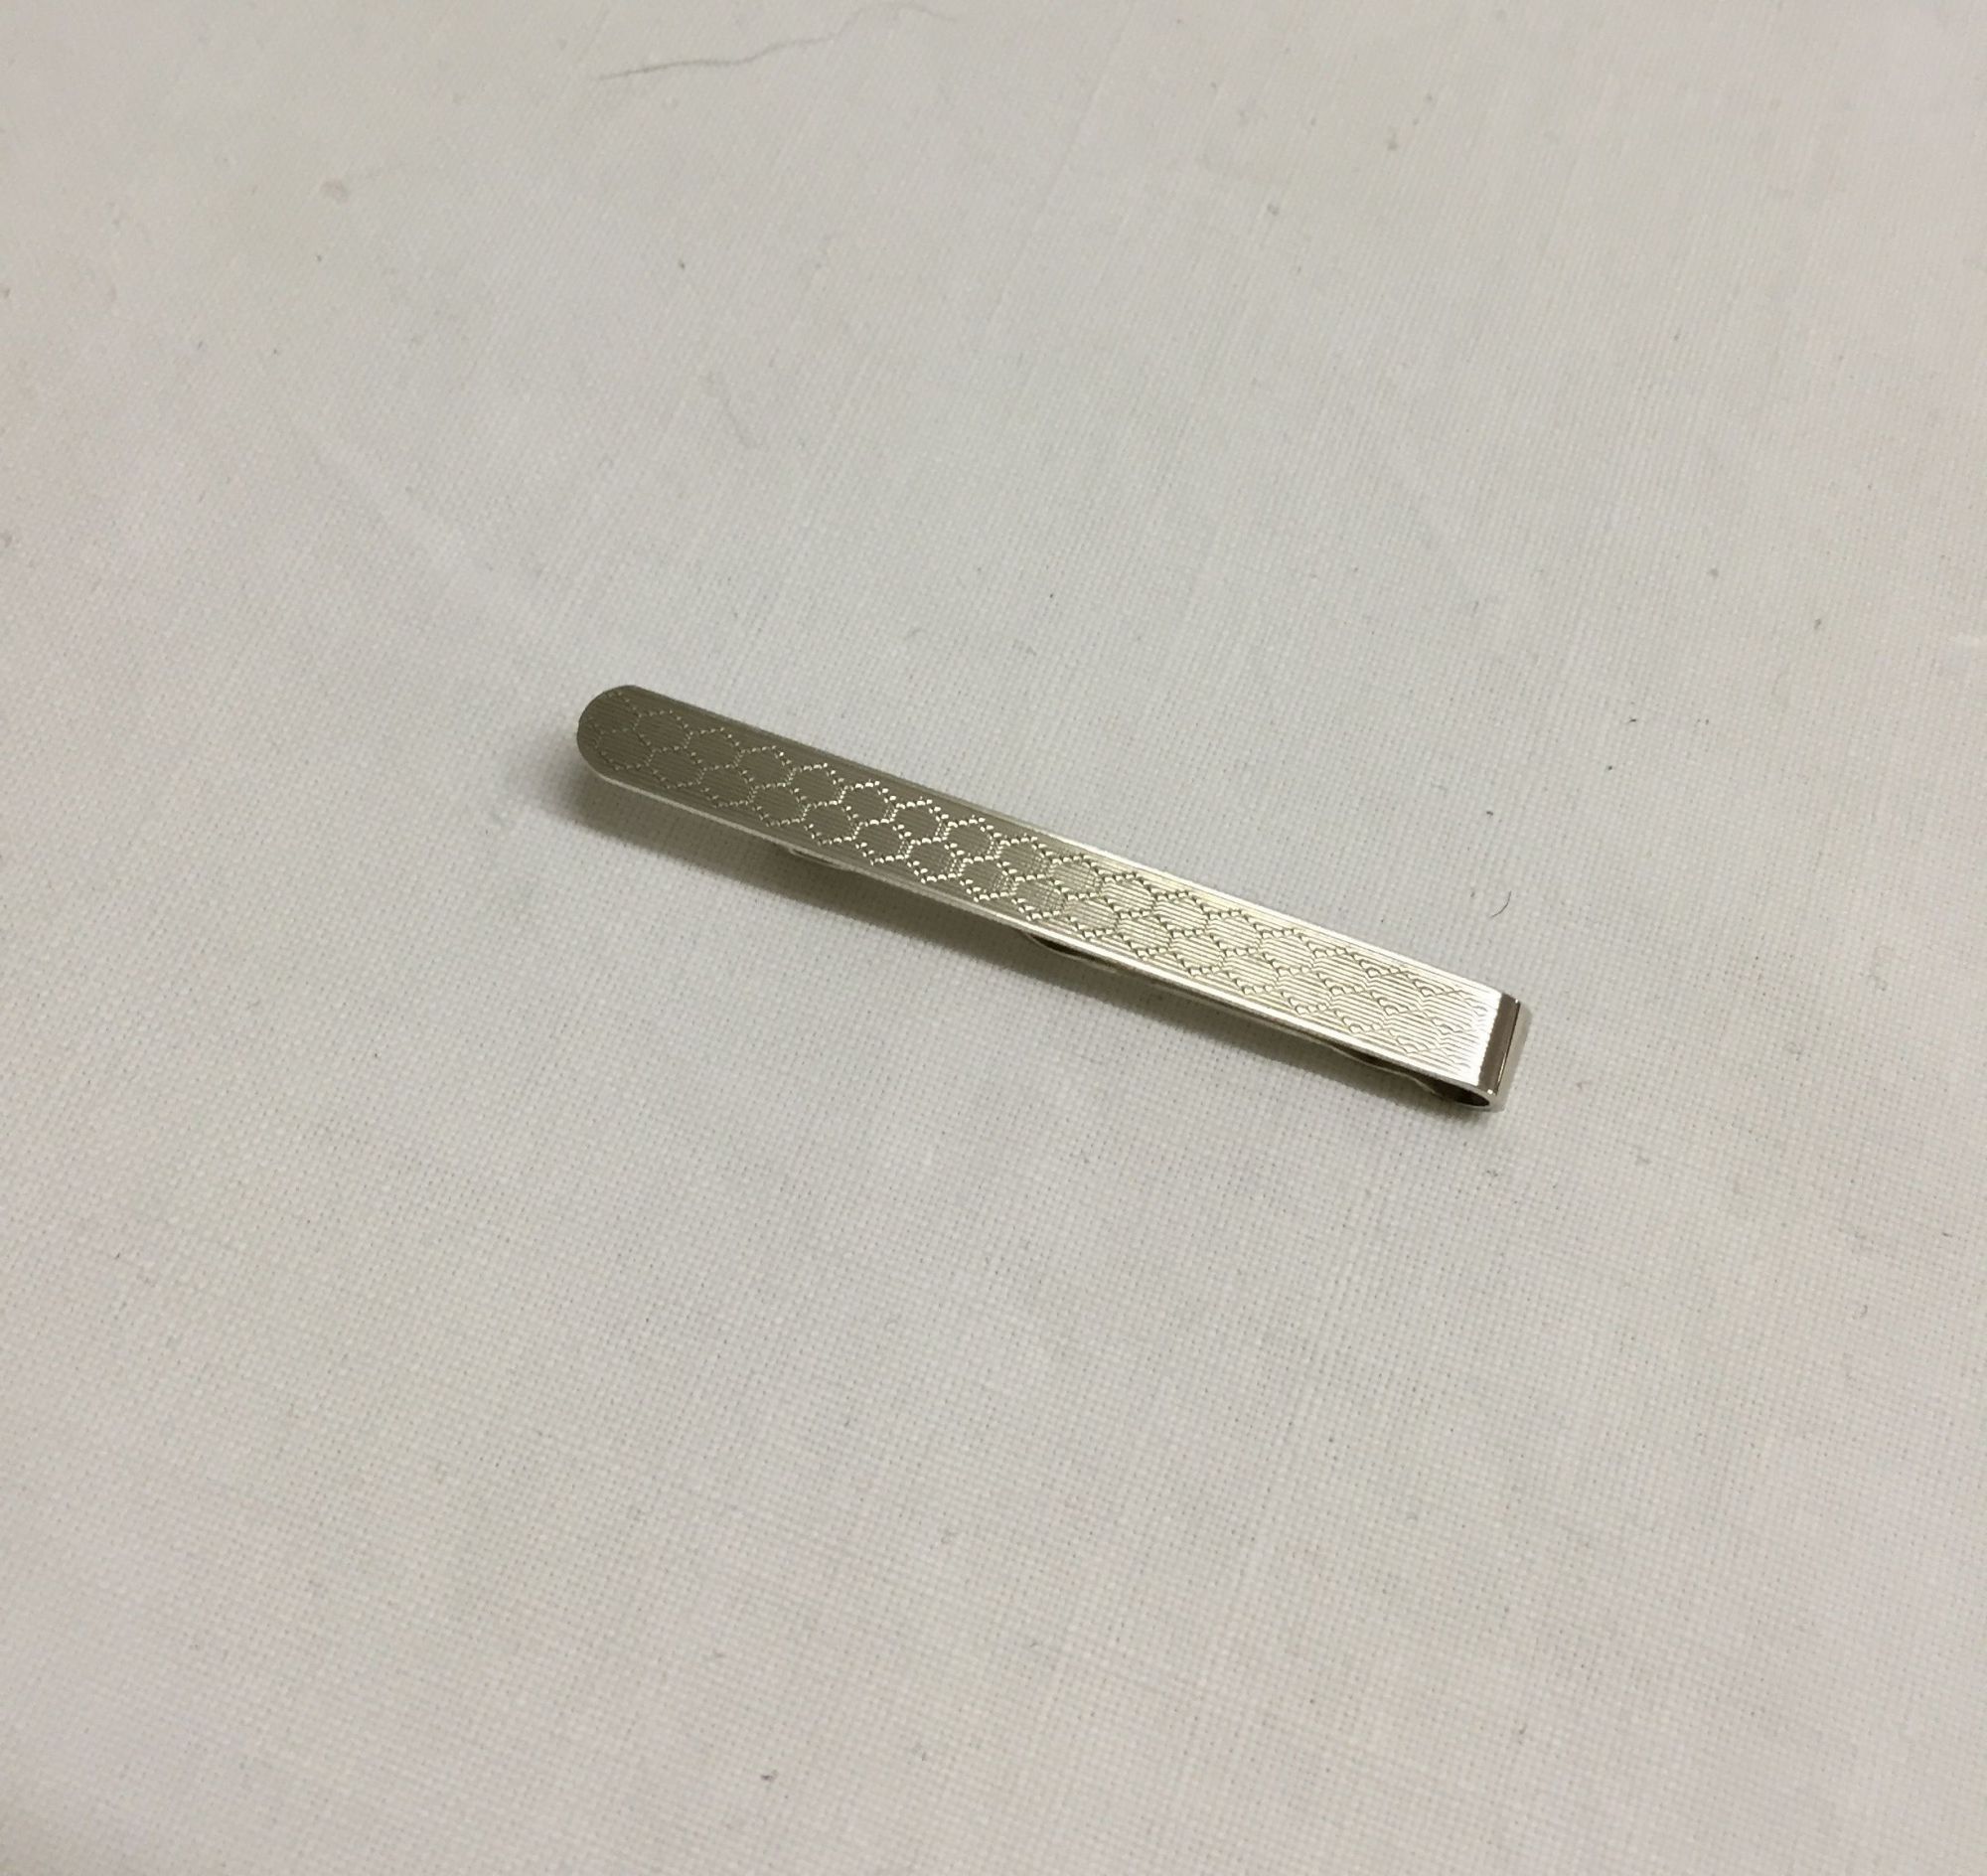 Hallmark silver tie bar with engine turned engraving.